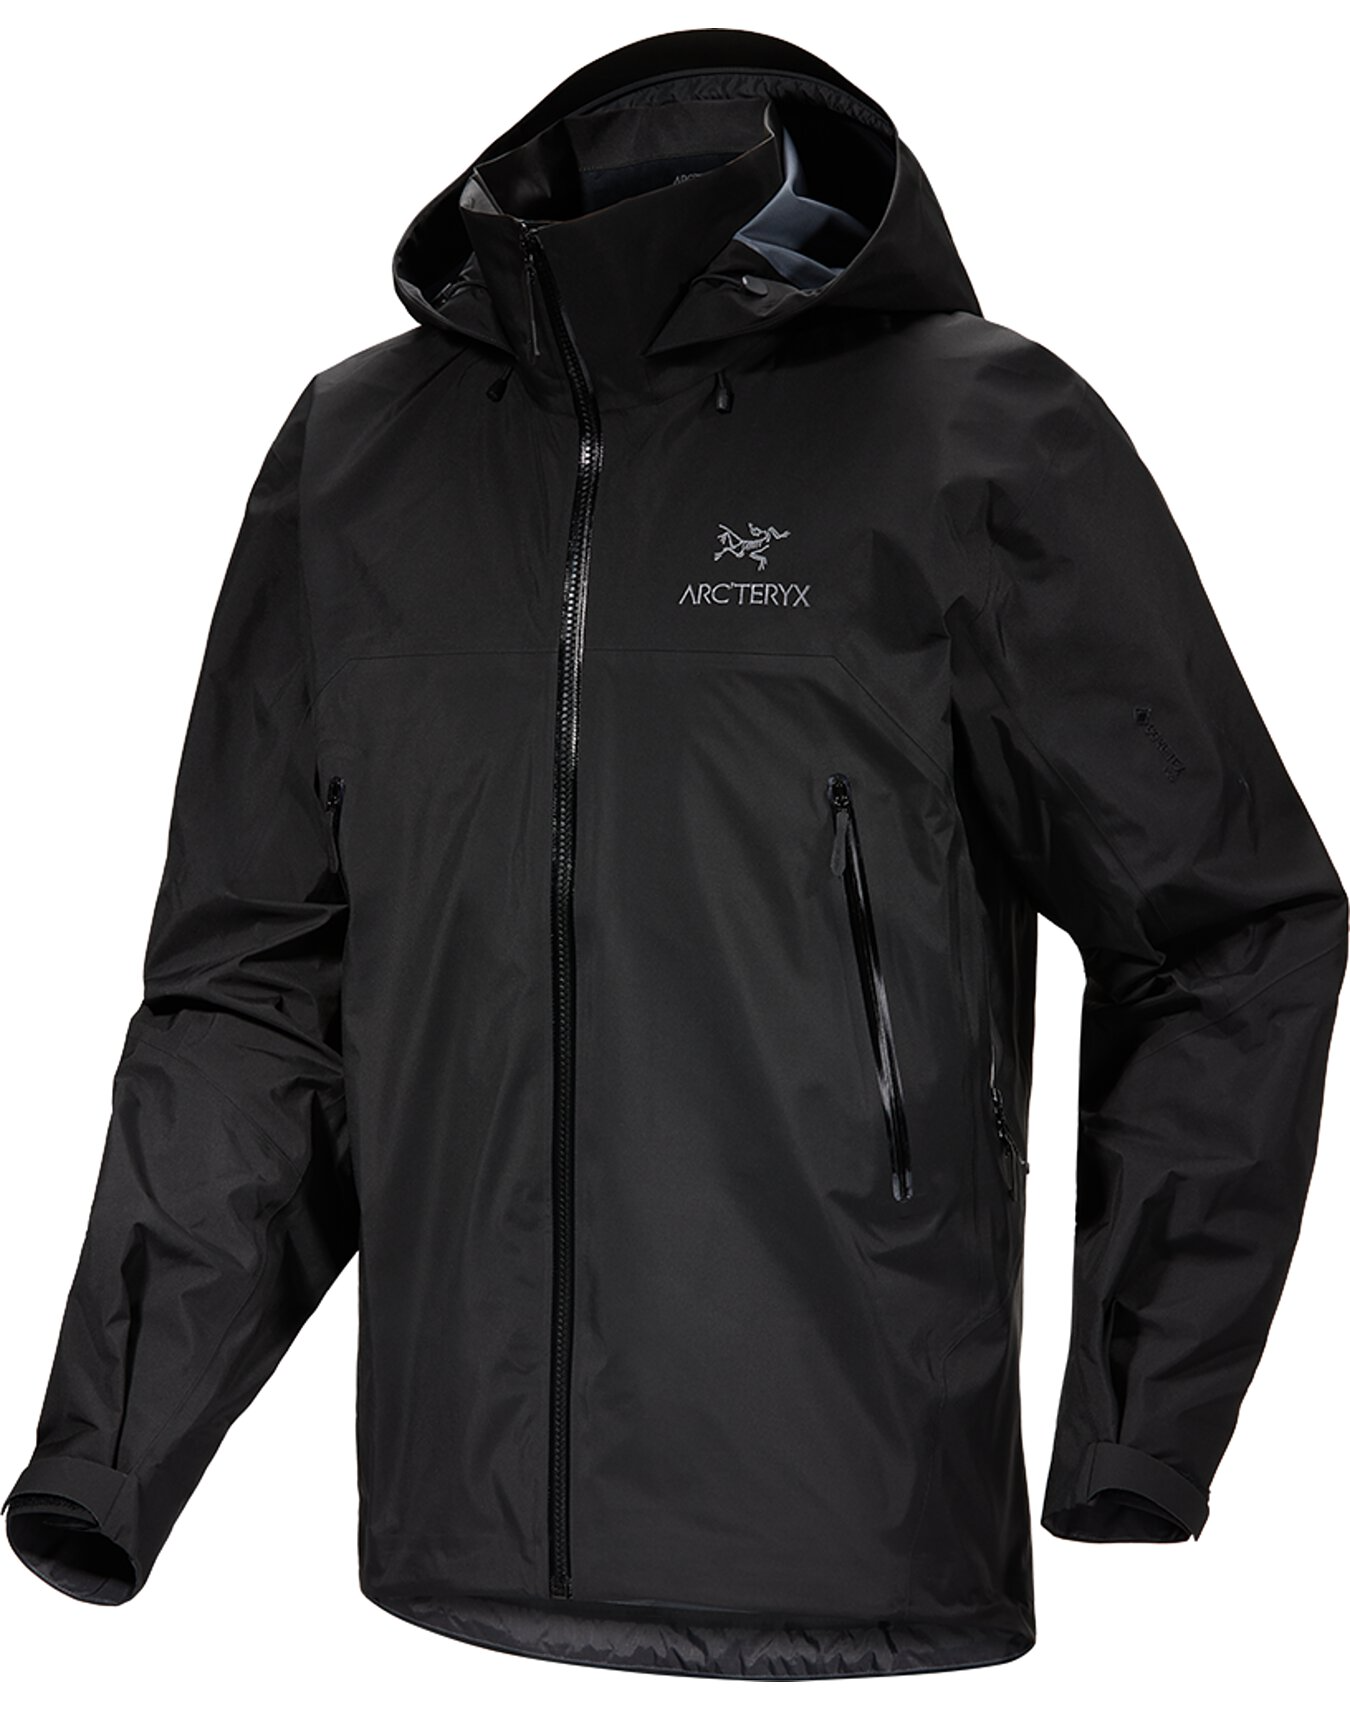 Beta AR Jacket Men's — Native Summit Adventure Outfitters